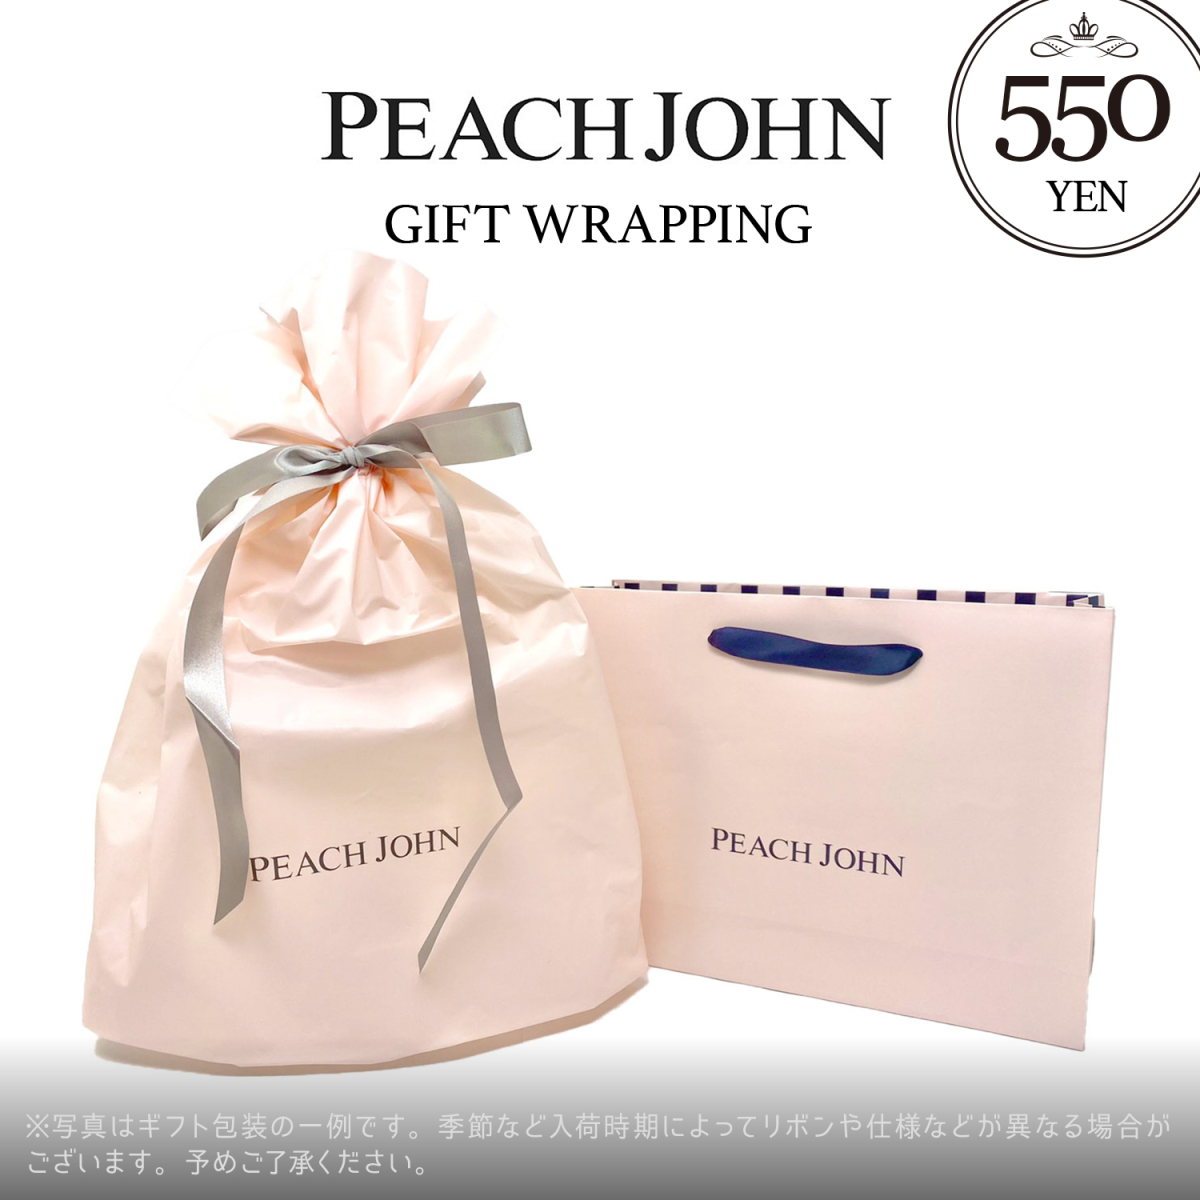  Peach John PEACH JOHNbom bust cream Ricci 150g bust care cream wrapping gift present free shipping popular recommendation 